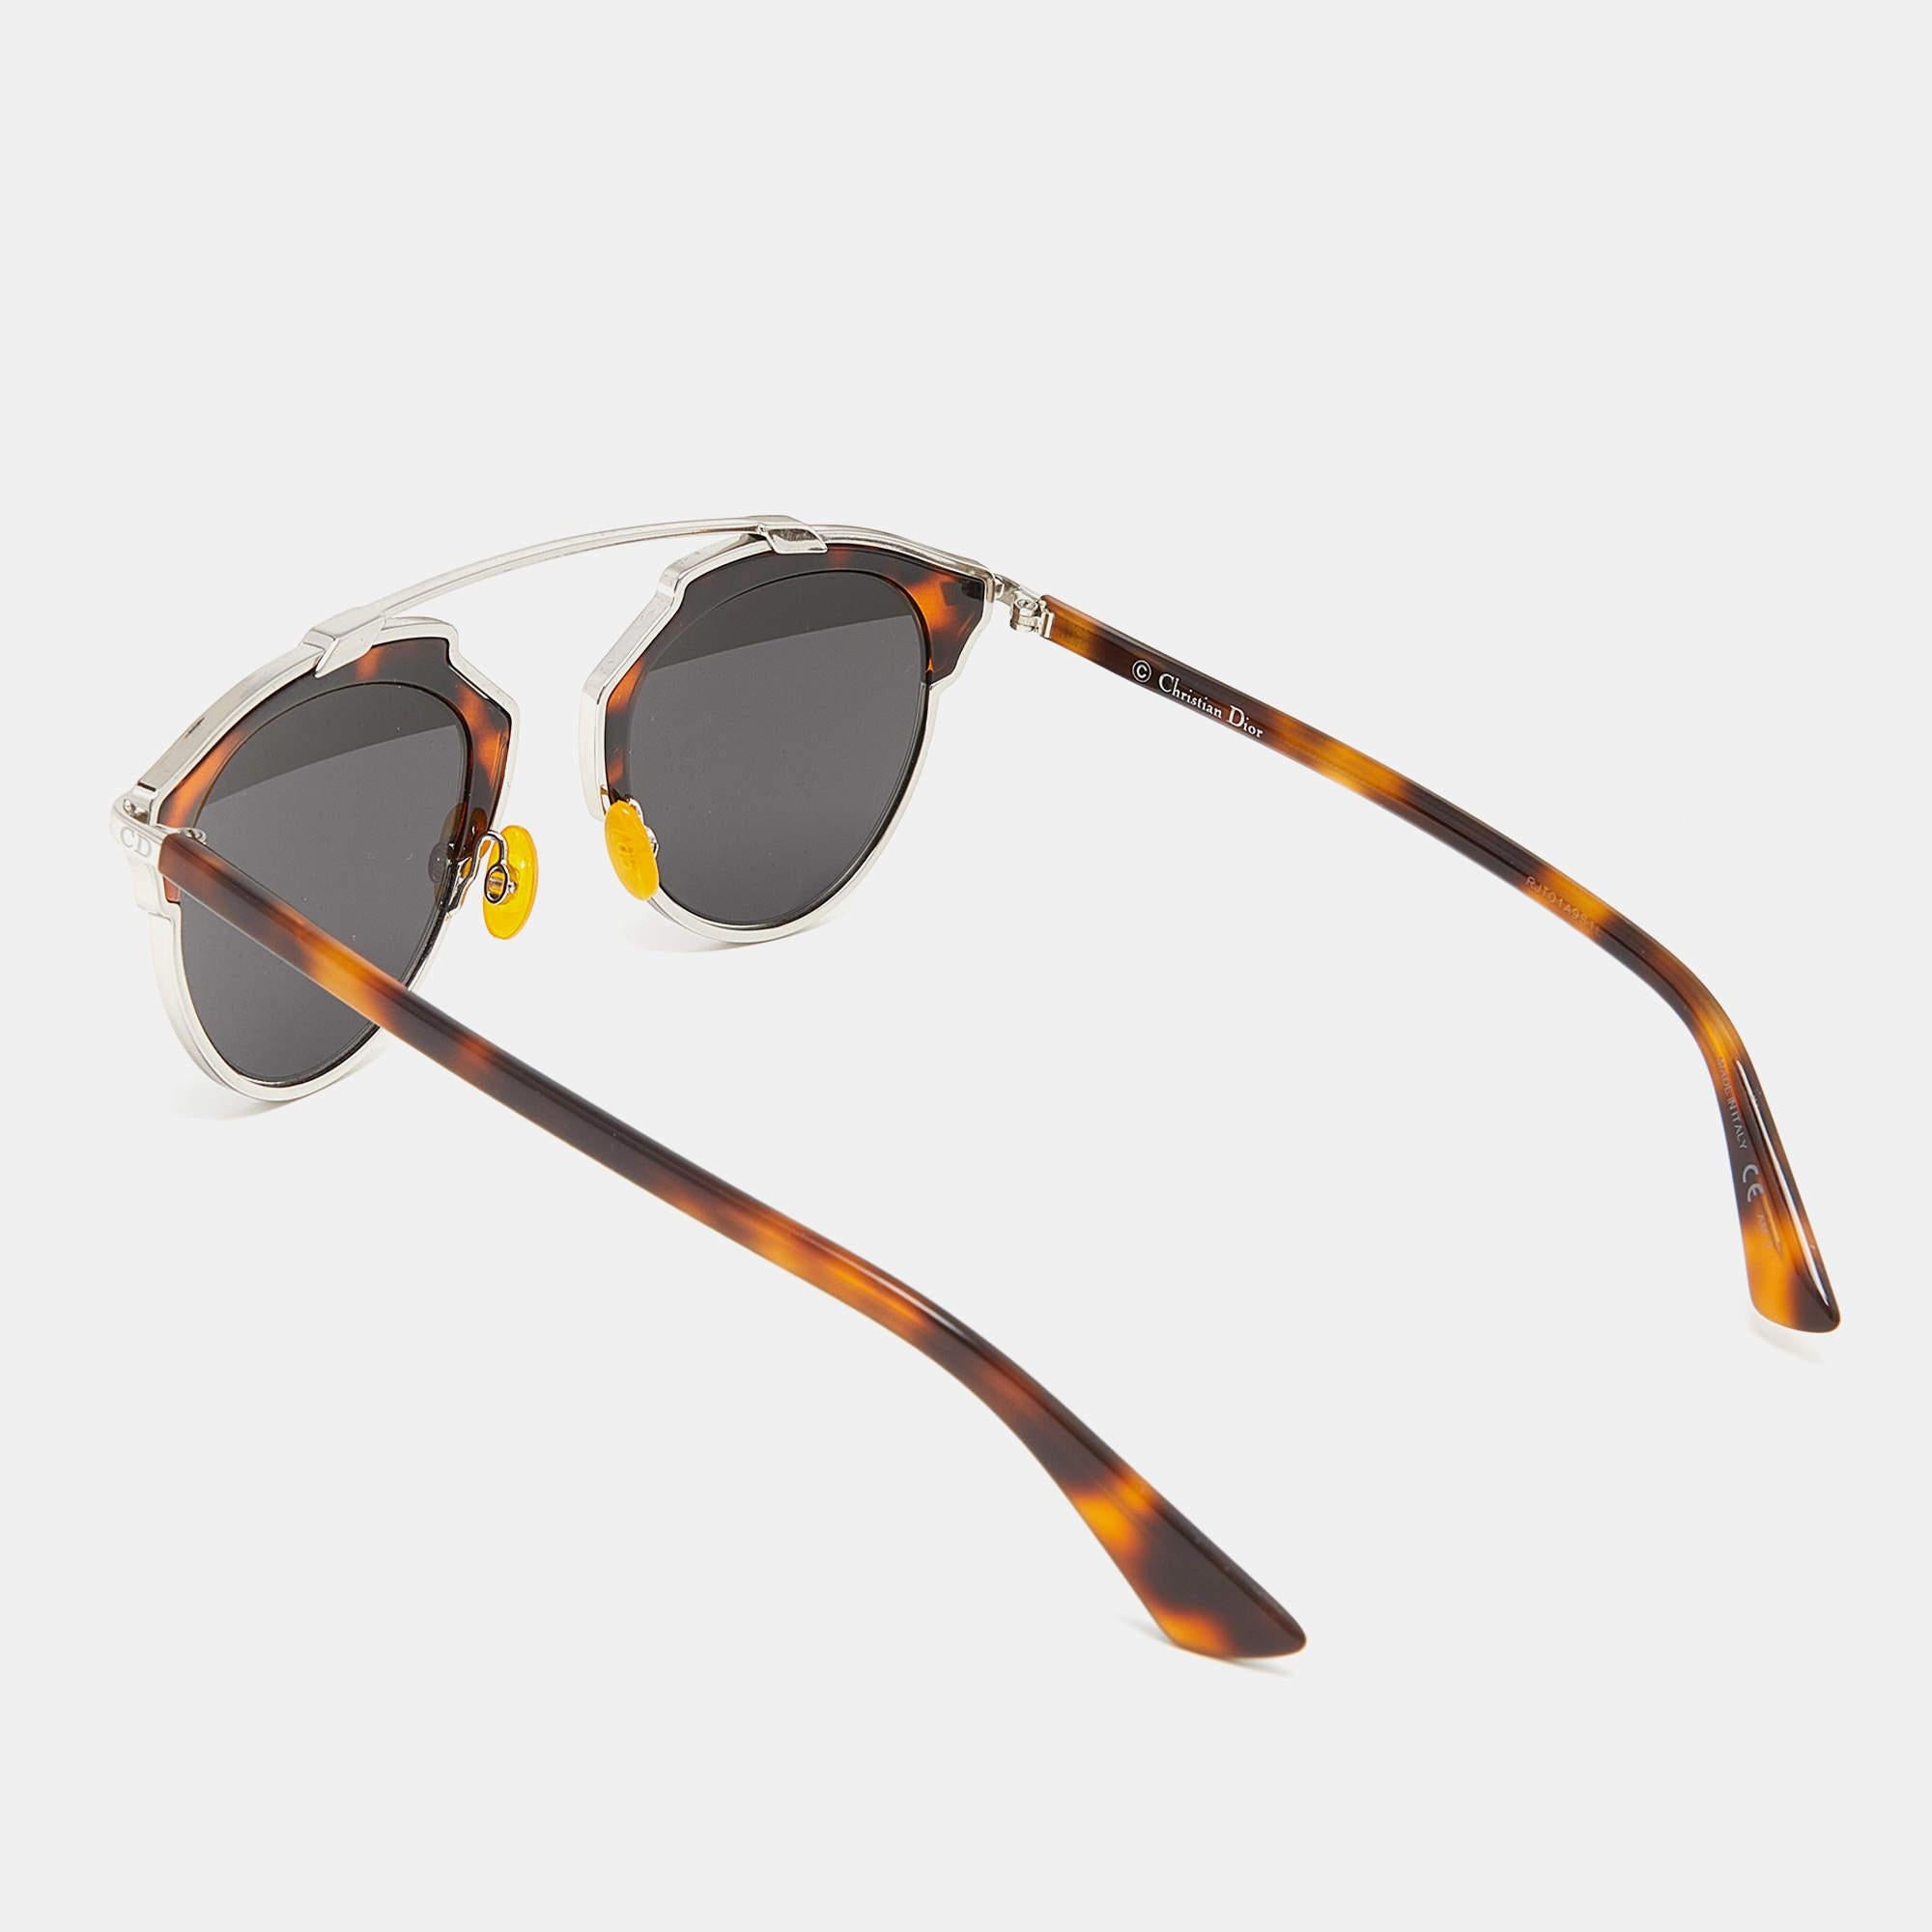 The stylish frame and good-quality lenses make these sunglasses a high-fashion accessory that you must own. Designed by Dior, the pair will look best with your statement outfits.

Includes
Authenticity Card, Original Box, Original Pouch, Original